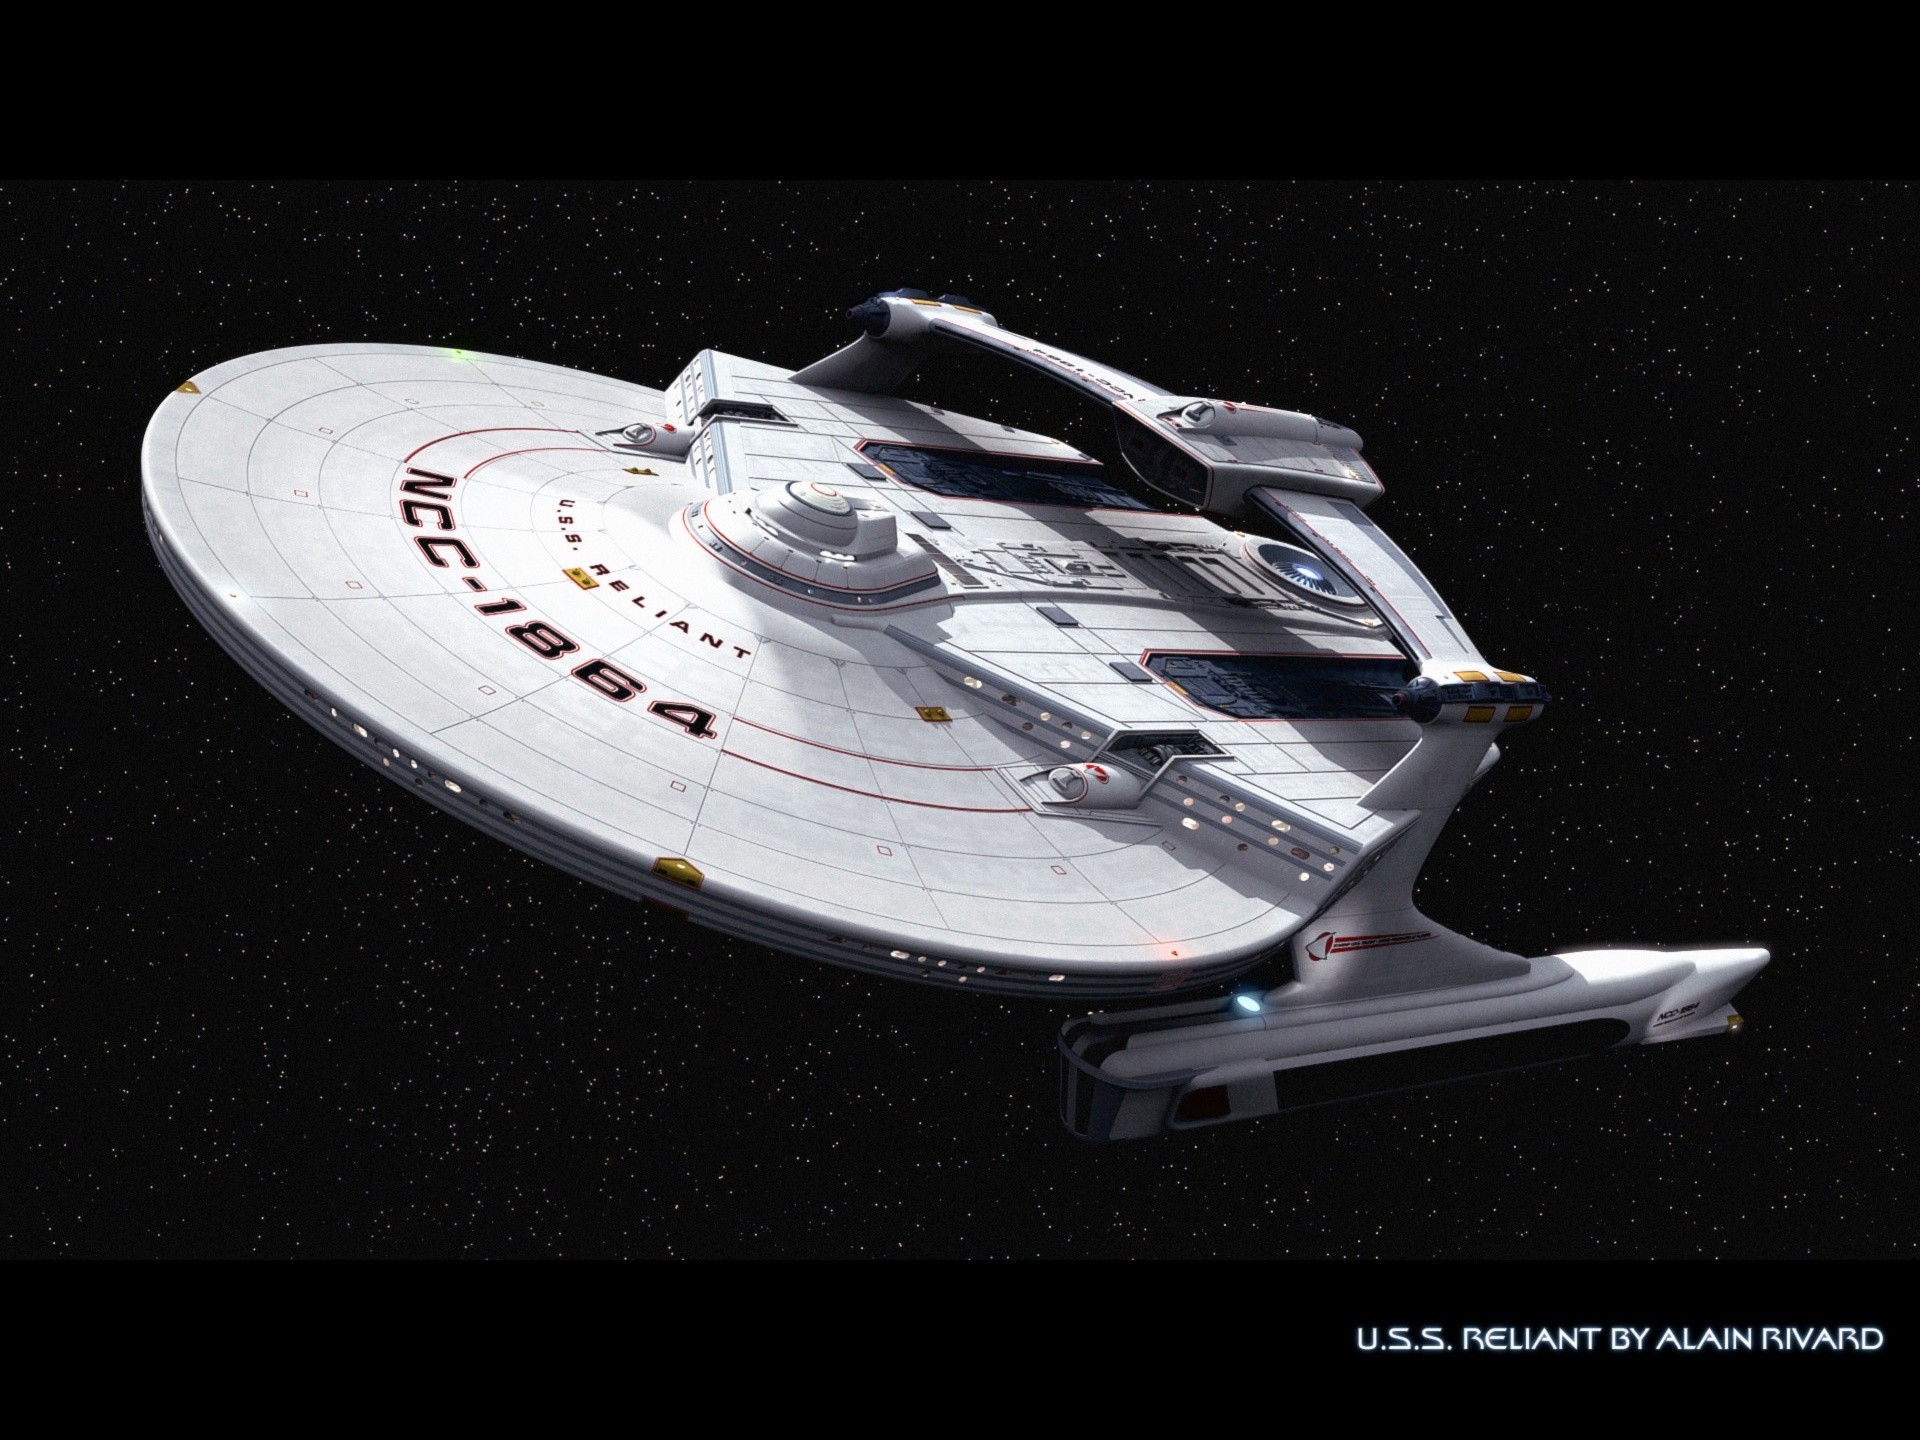 1920x1440 Star Trek U.S.S. Reliant, awesome wallpaper. Here is the source link.